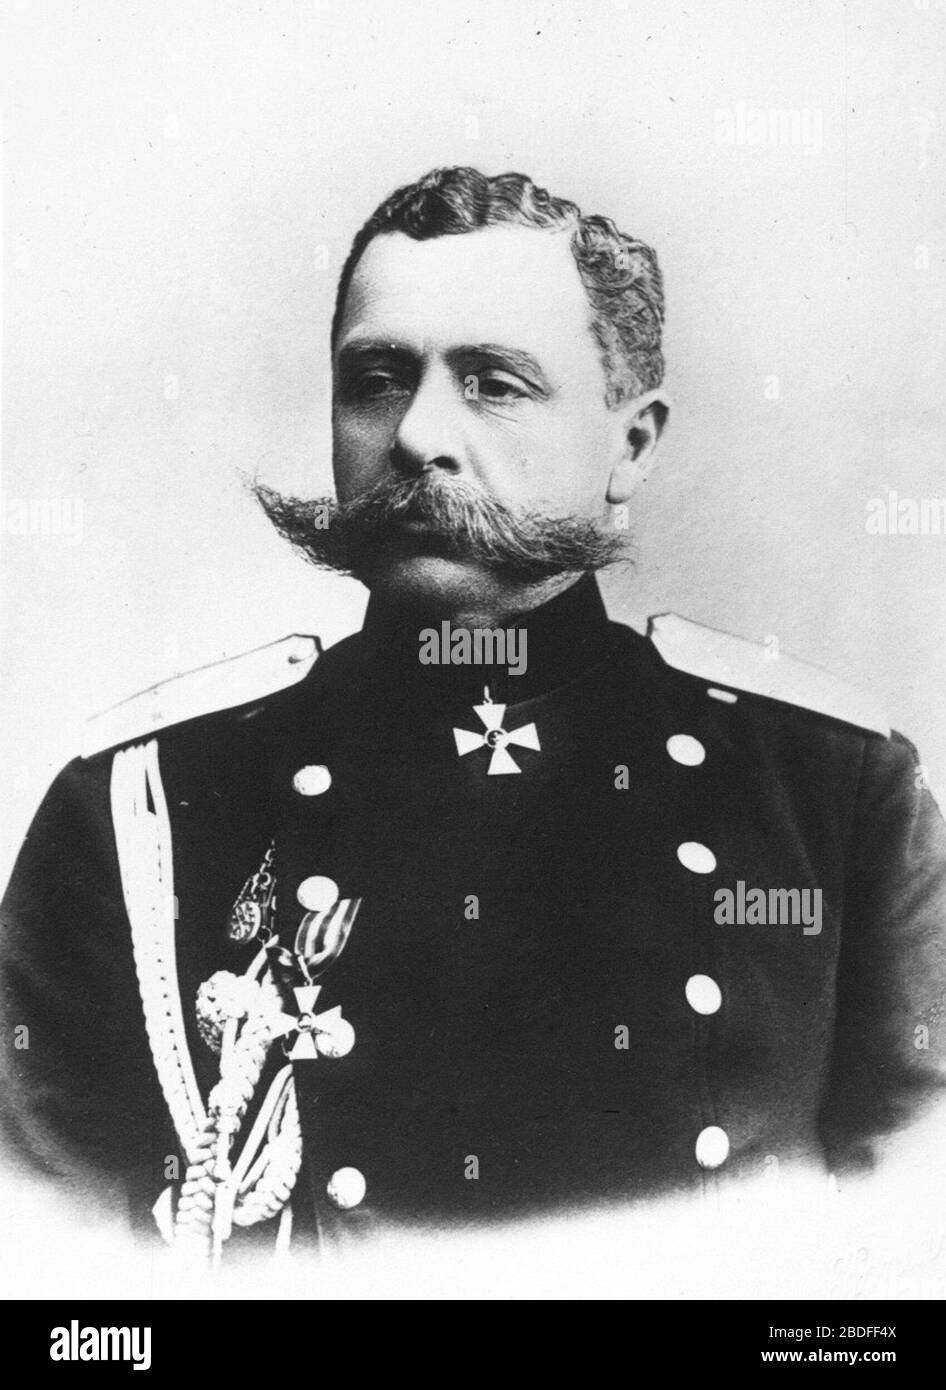 'English: Paul Georg von Rennenkampff (1854-1918), Baltic German General of the cavalry and adjutant general in the Imperial Russian Army; circa 1910 date QS:P,+1910-00-00T00:00:00Z/9,P1480,Q5727902; http://gallica.bnf.fr/ark:/12148/btv1b6928839h; Unknown author; ' Stock Photo